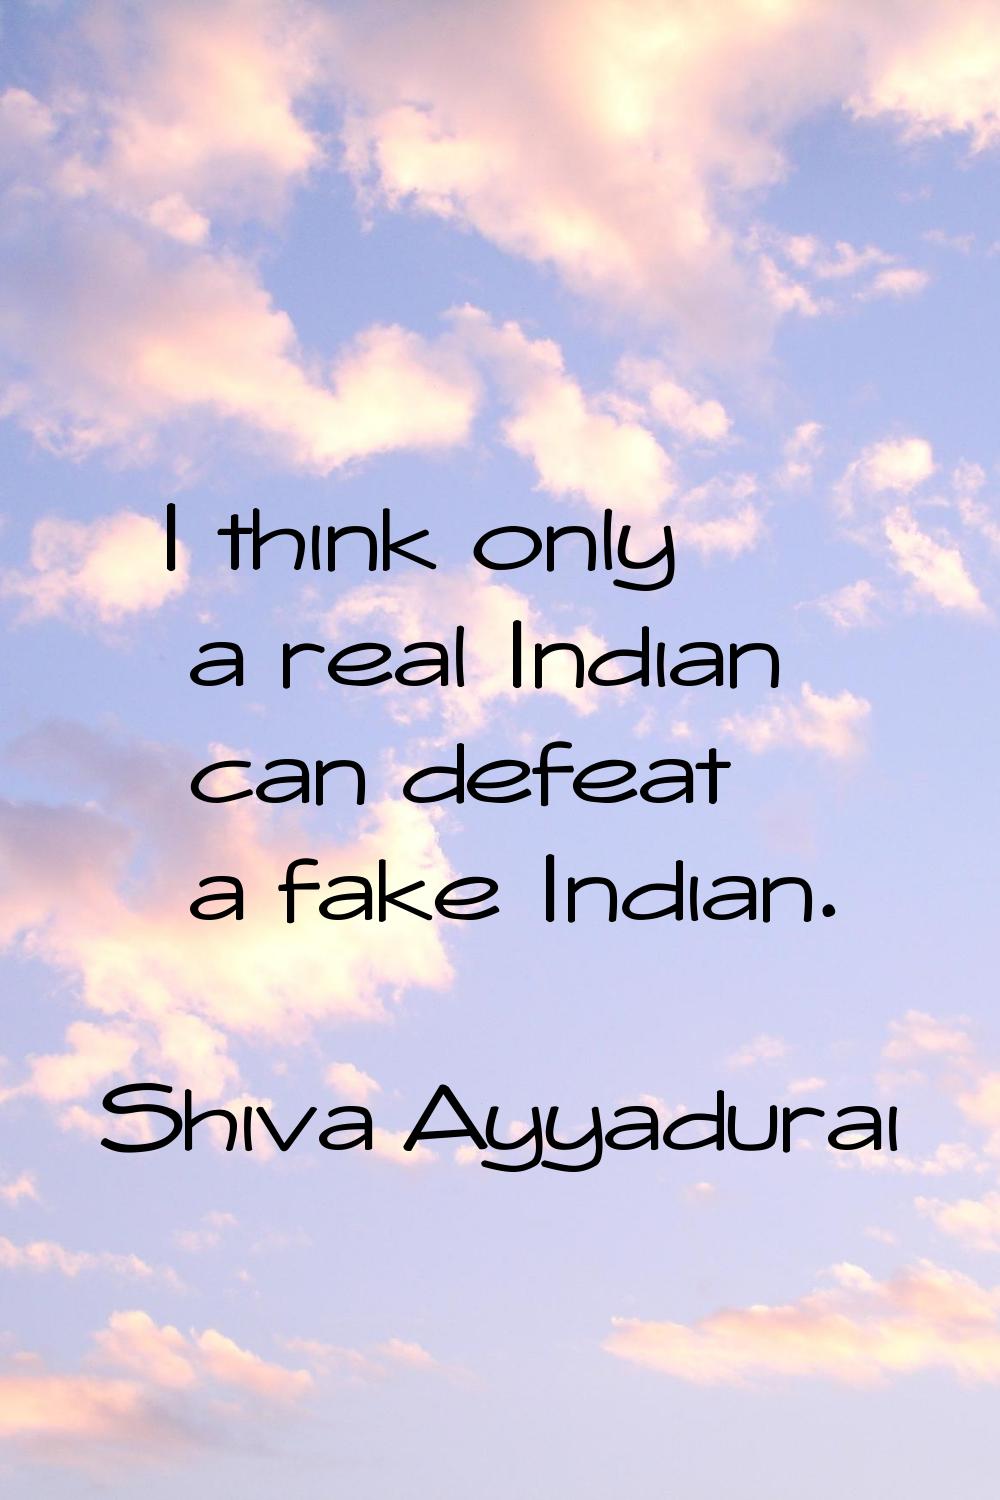 I think only a real Indian can defeat a fake Indian.